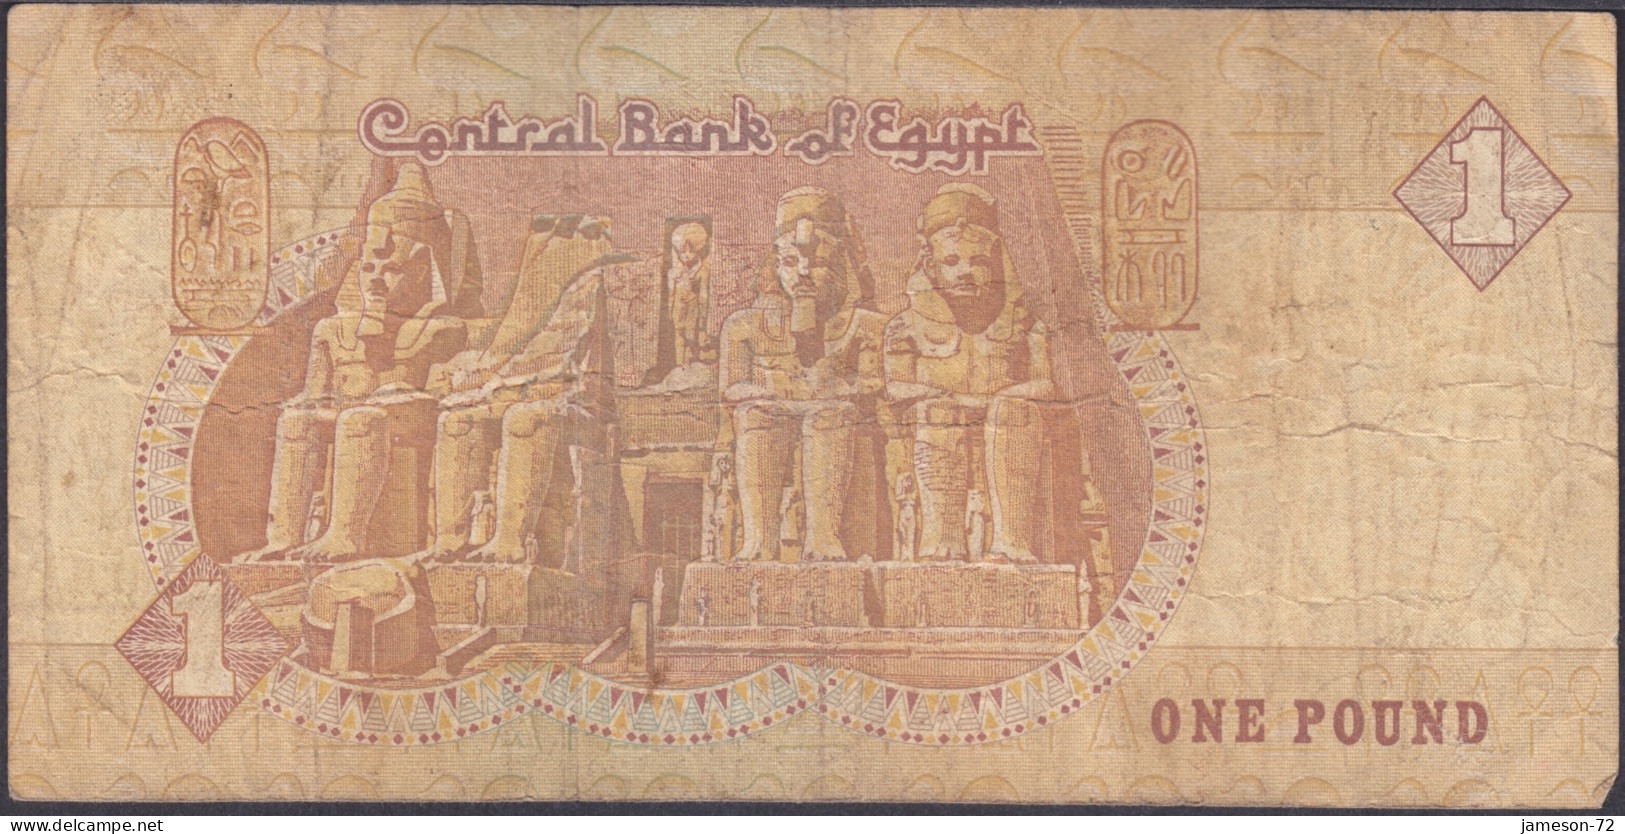 EGYPT - 1 Pound ND (1993-2001) P# 50e Africa Banknote - Edelweiss Coins - Egypt